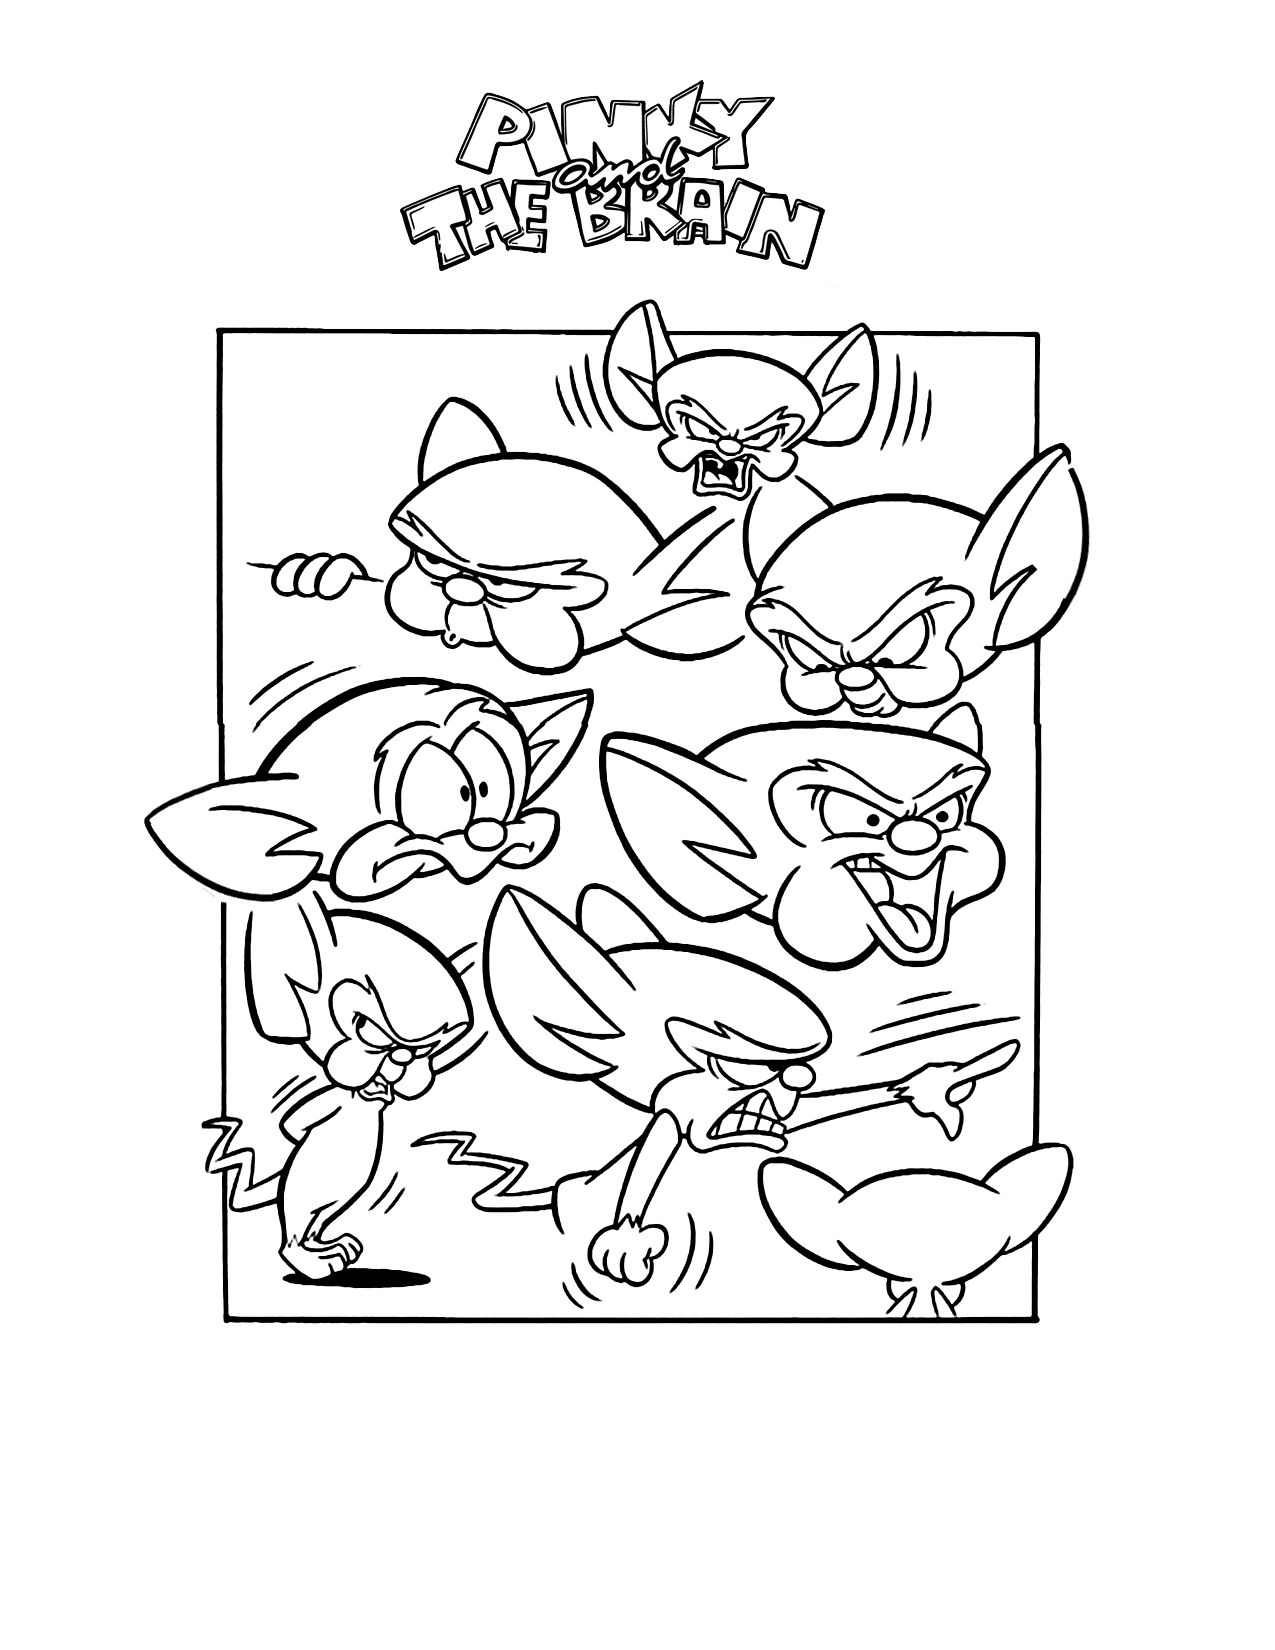 The Brain Cartoon Coloring Page